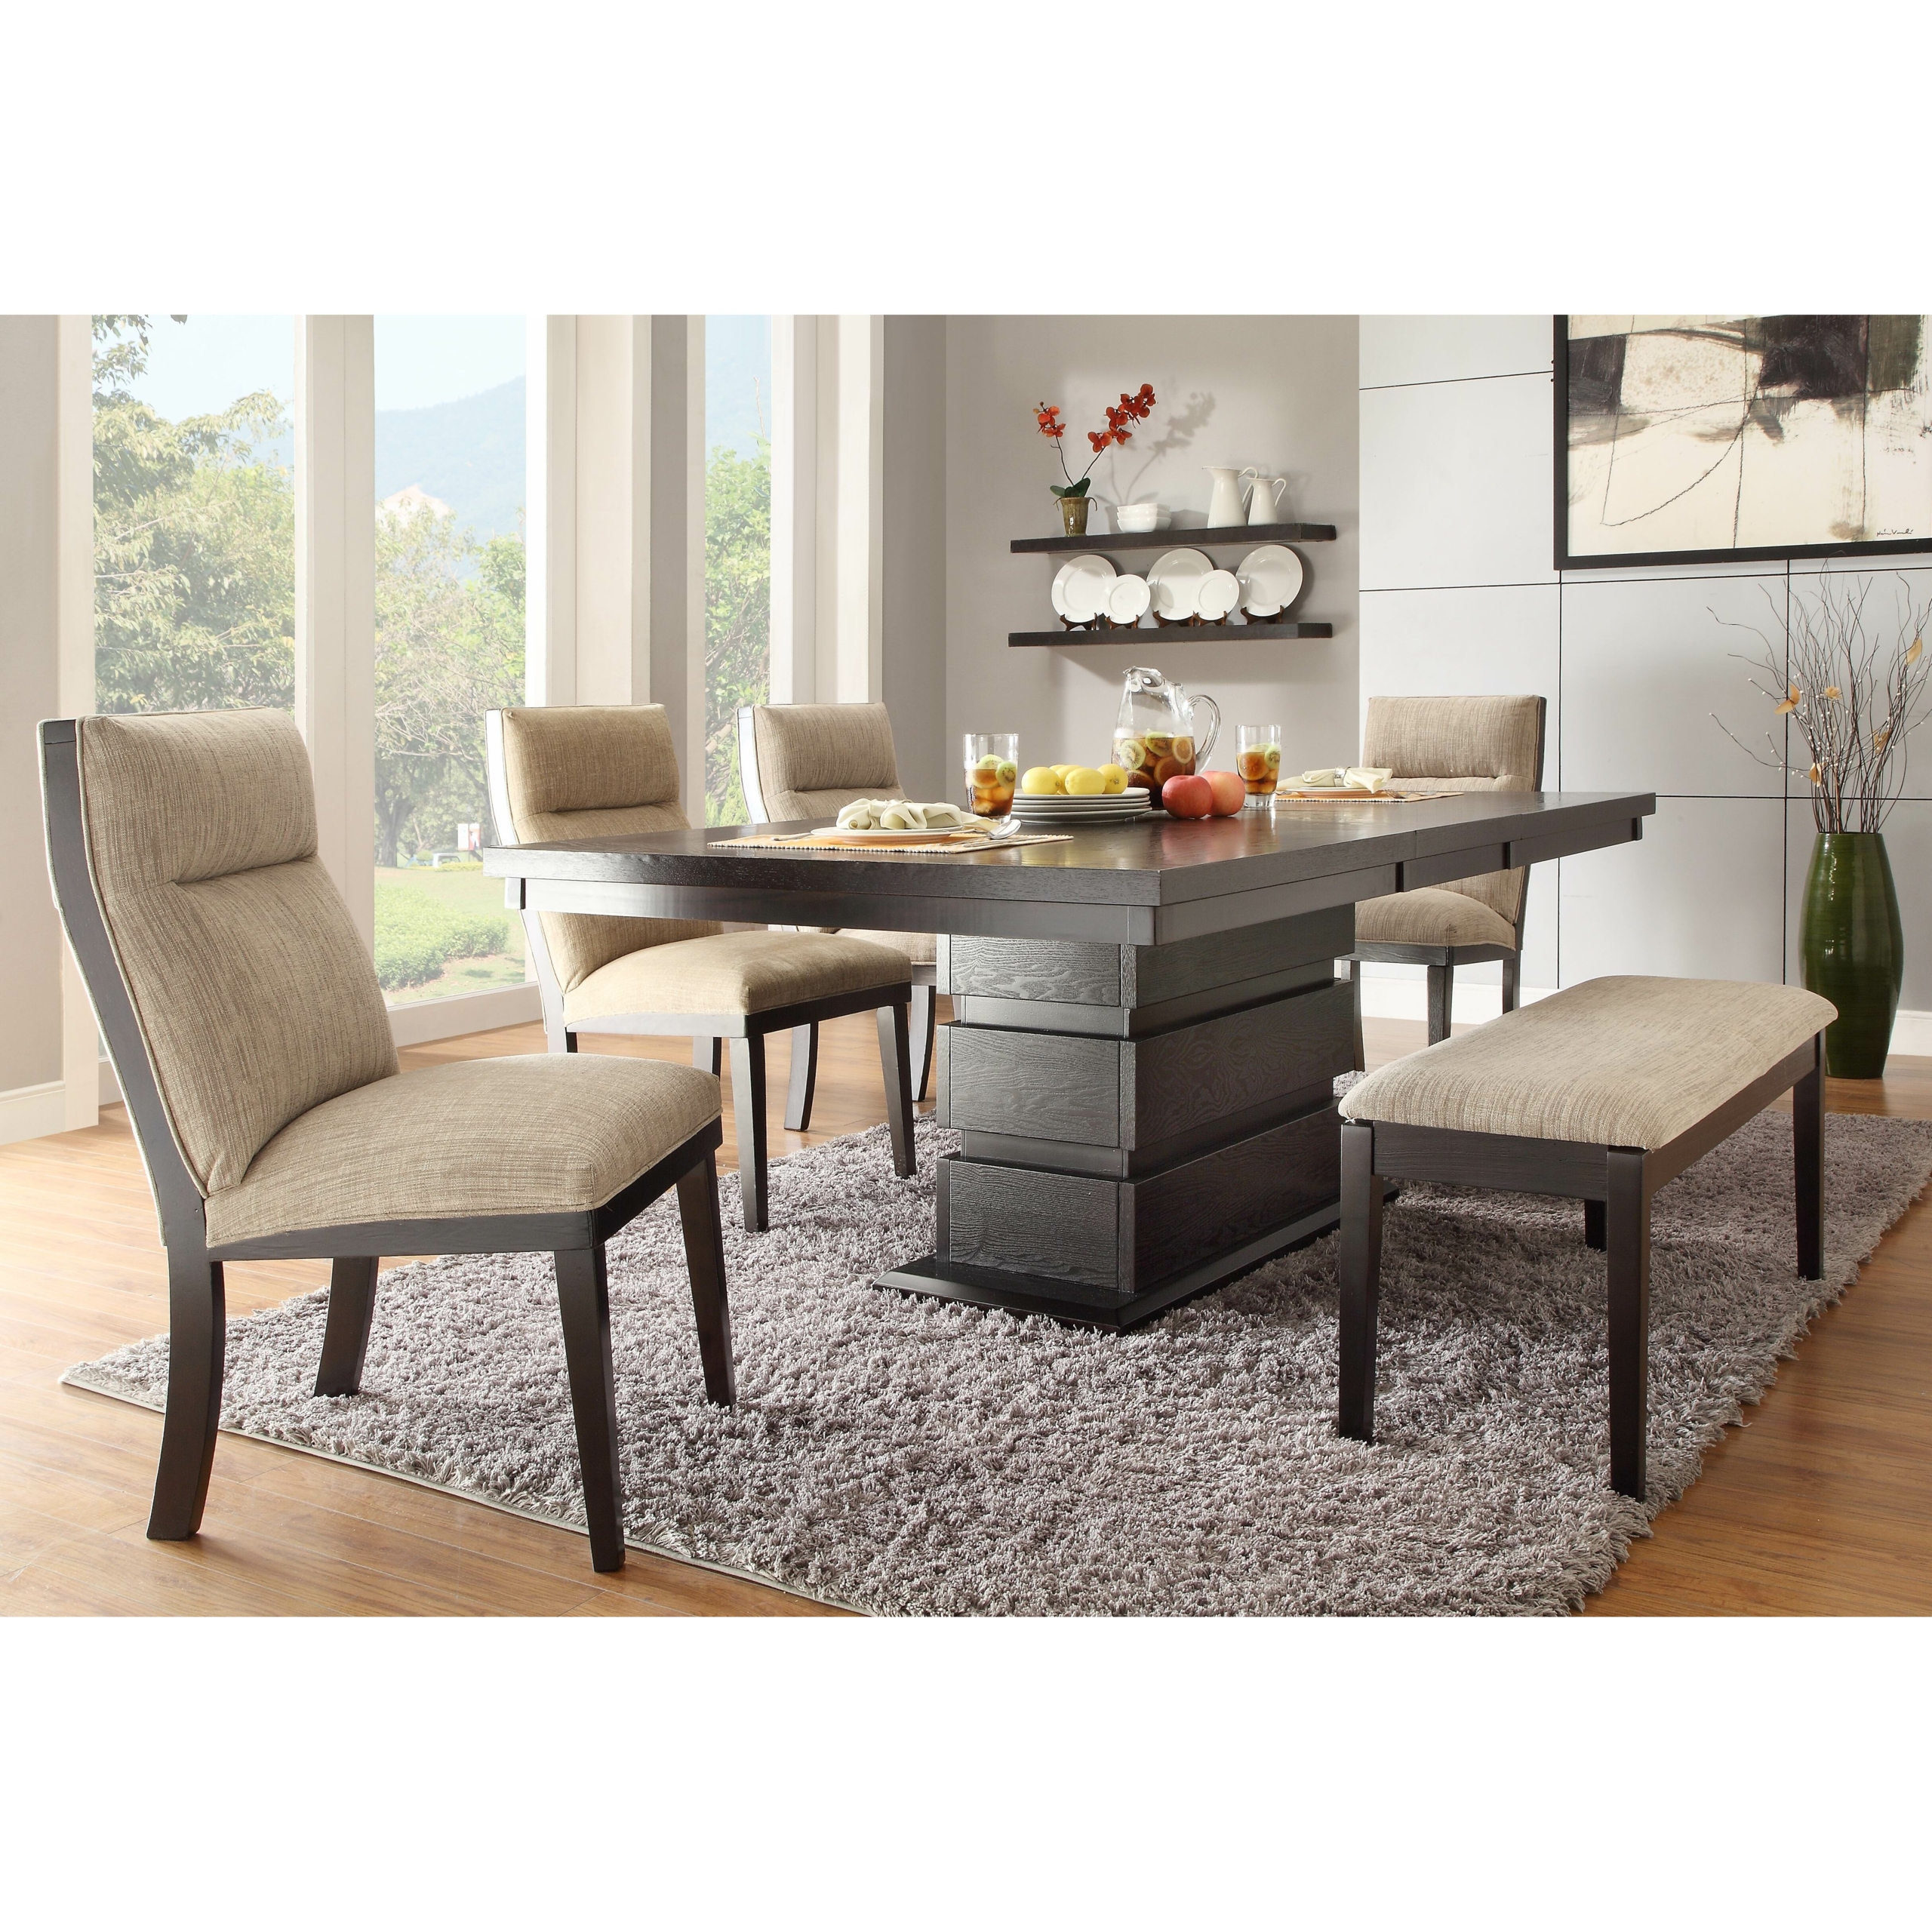 Dining Table With Bench Visualhunt, Dining Room Sets With Bench